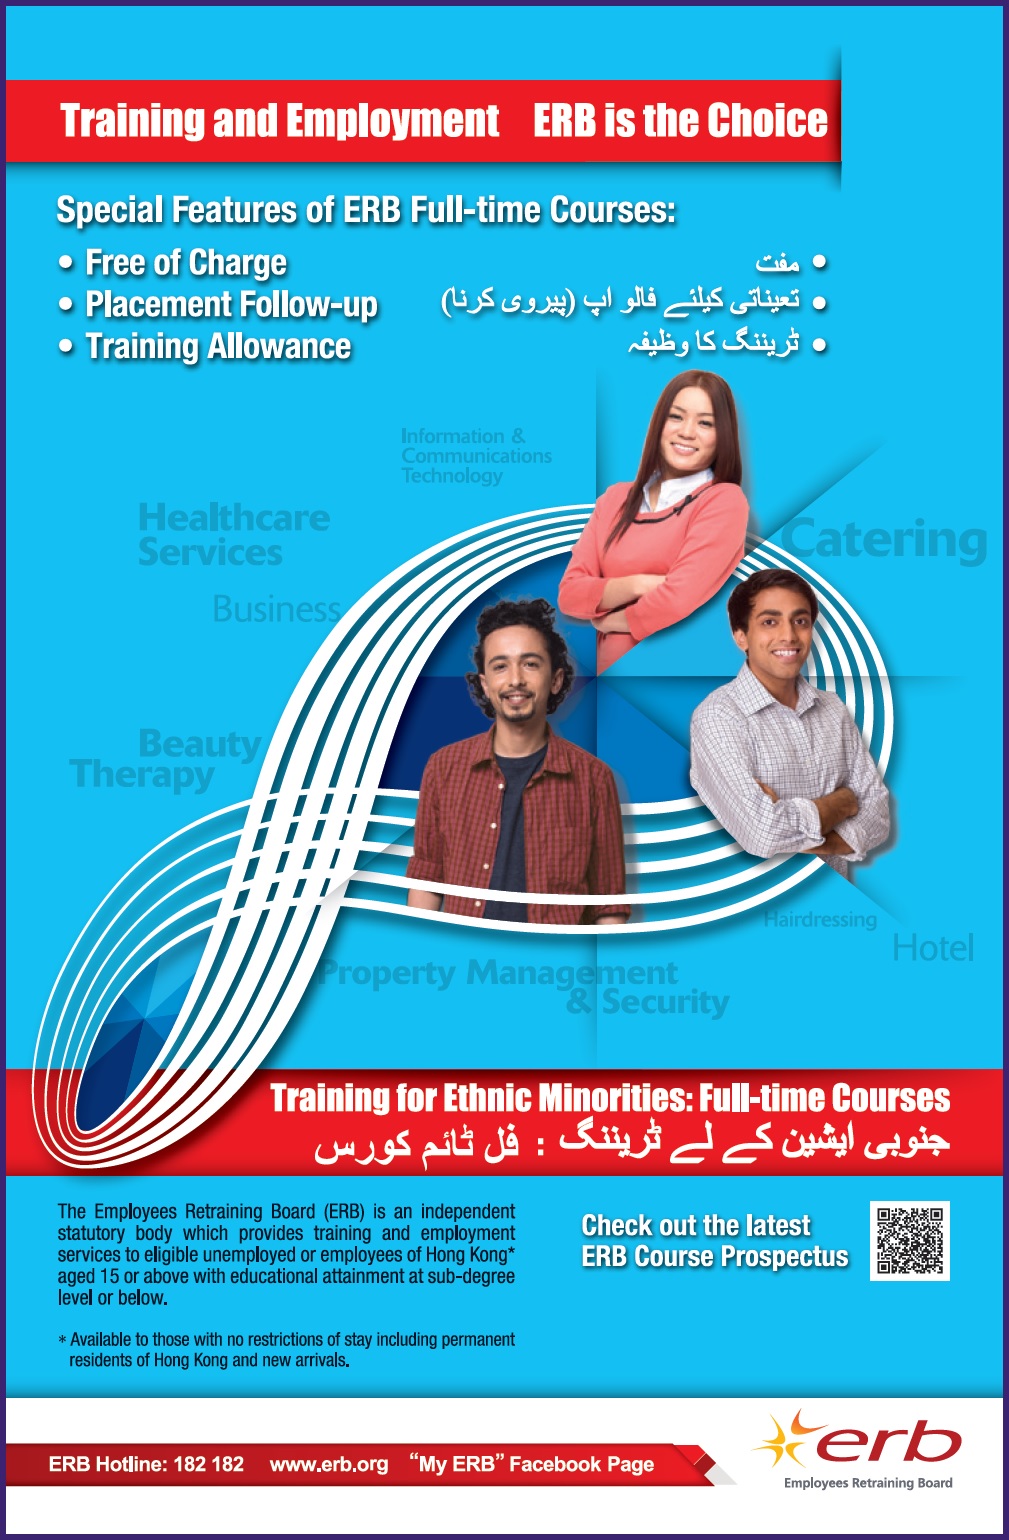 Click here to download the image version of newspaper advertisement of Training for Ethnic Minorities (May 2018) (Urdu)